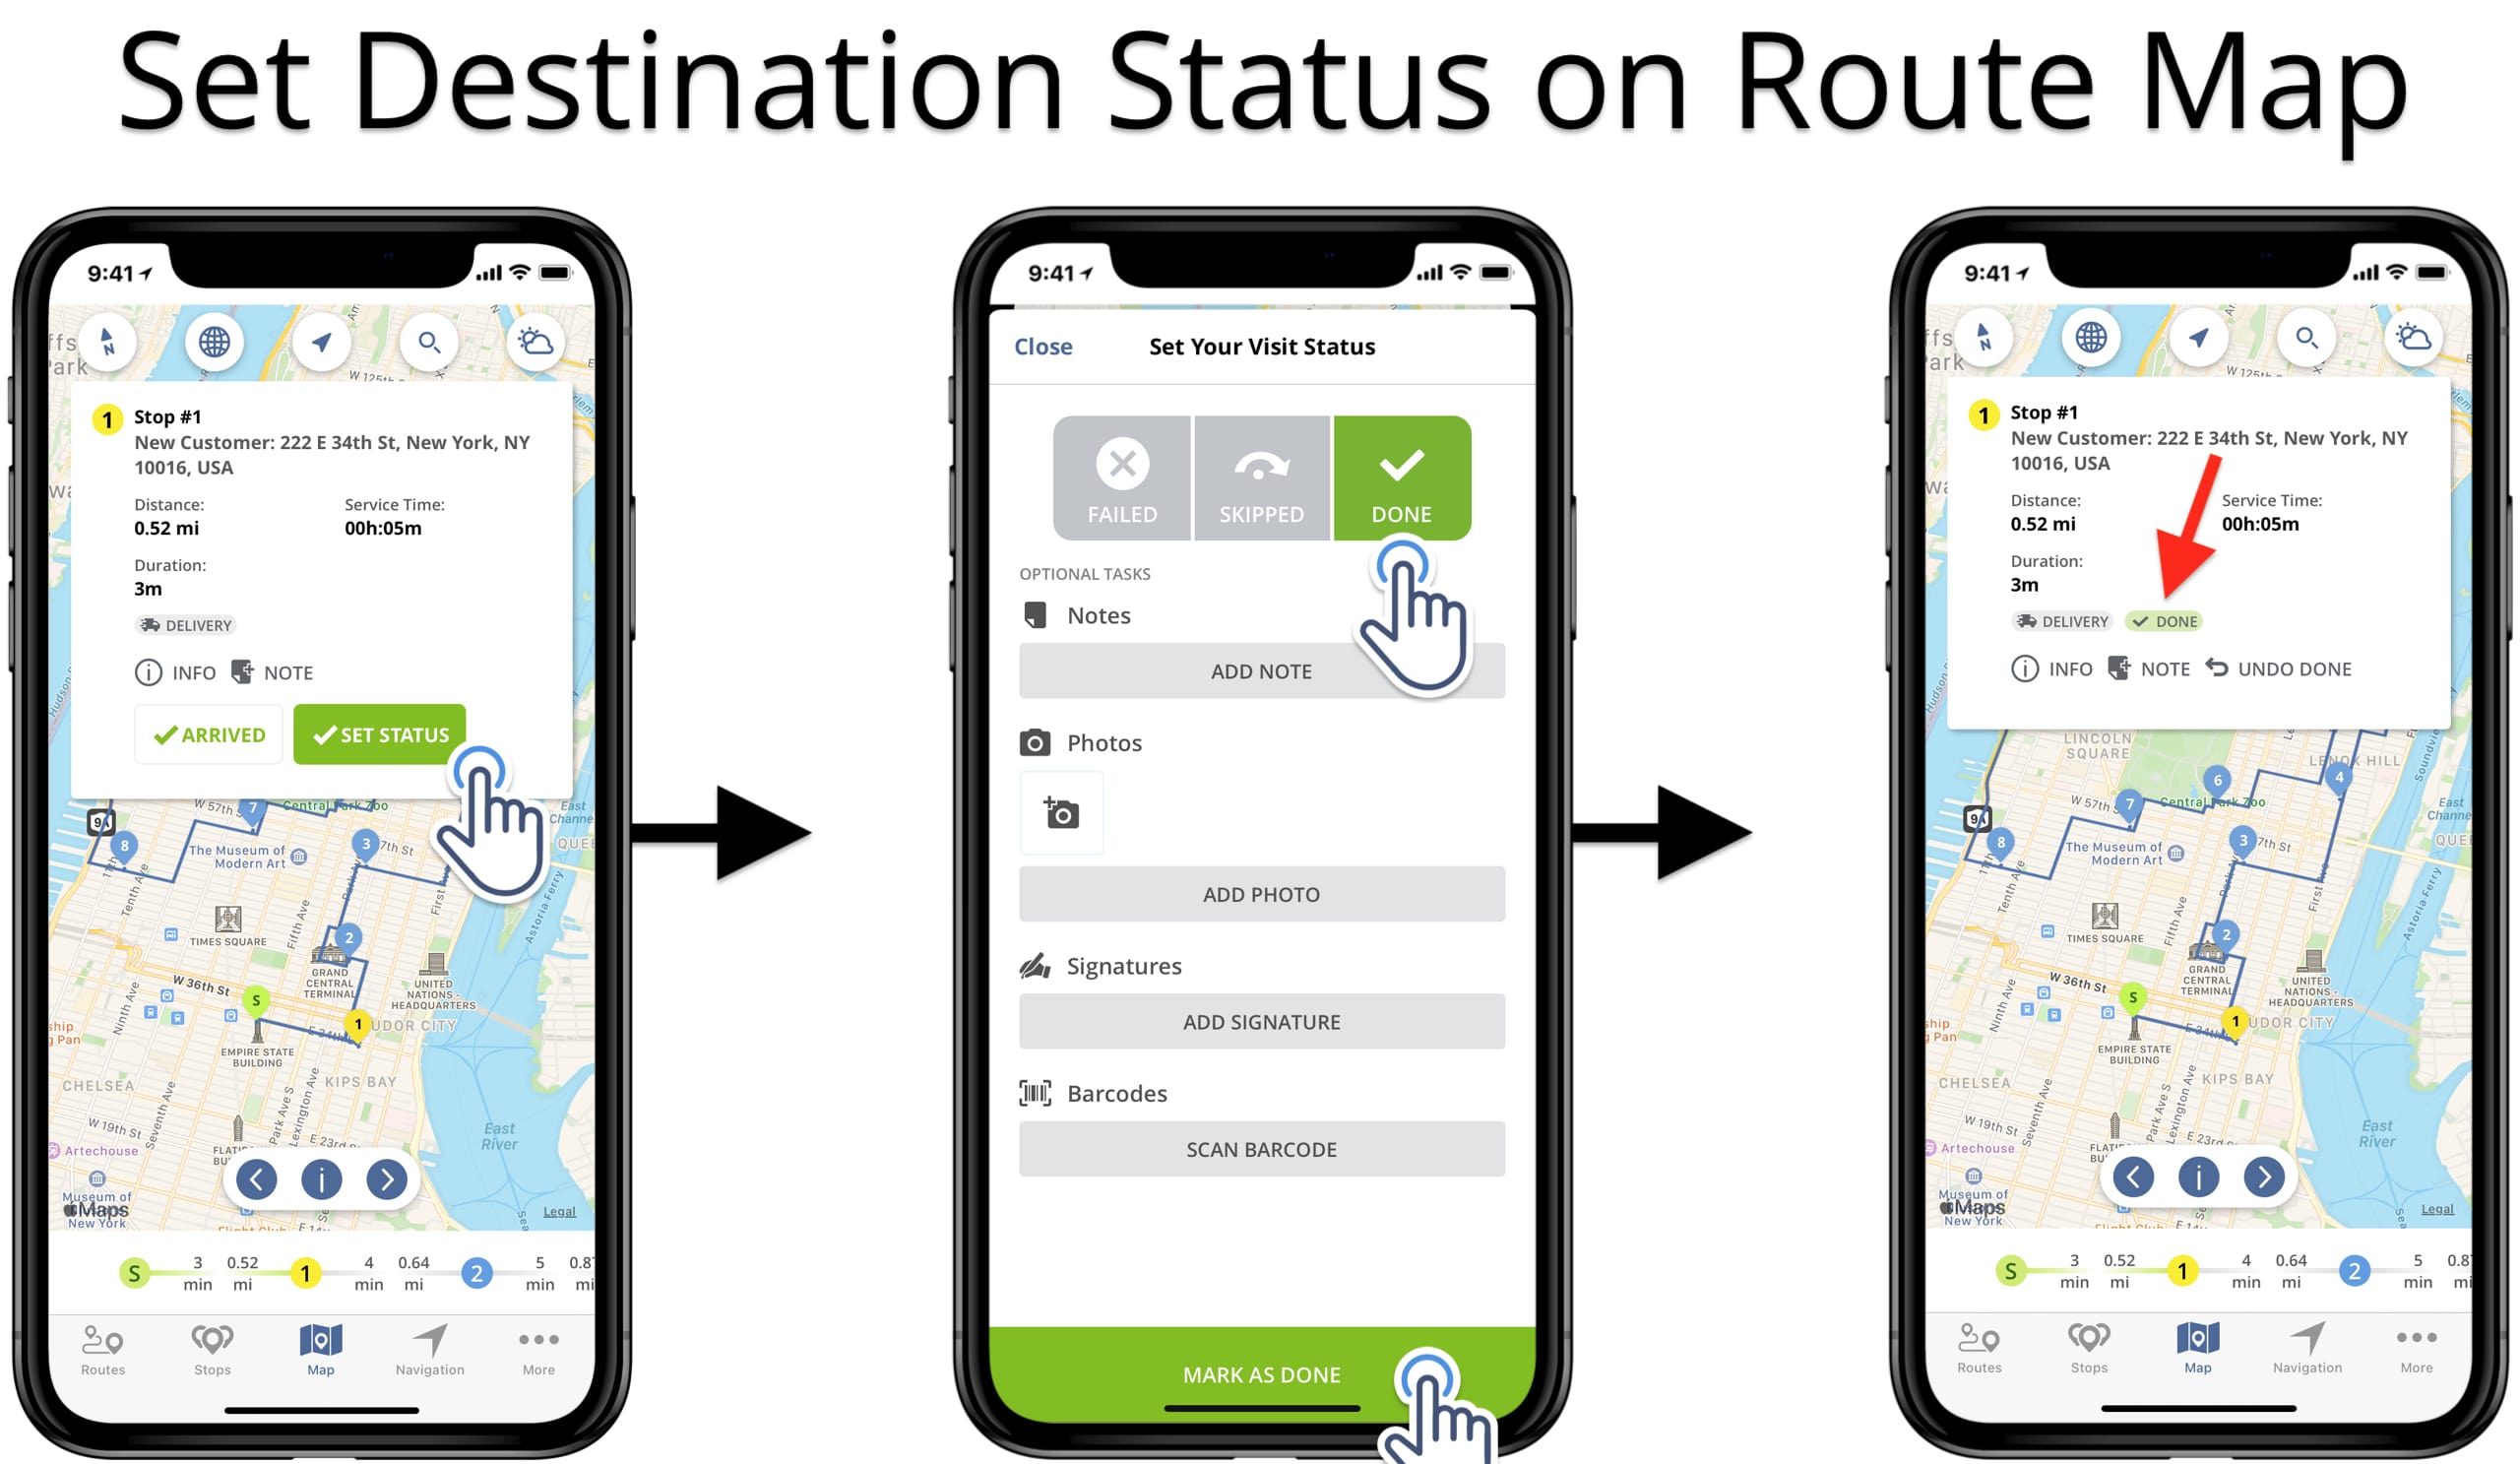 Using route map on iOS route planner app to set Failed, Skipped, and Done stops statuses.